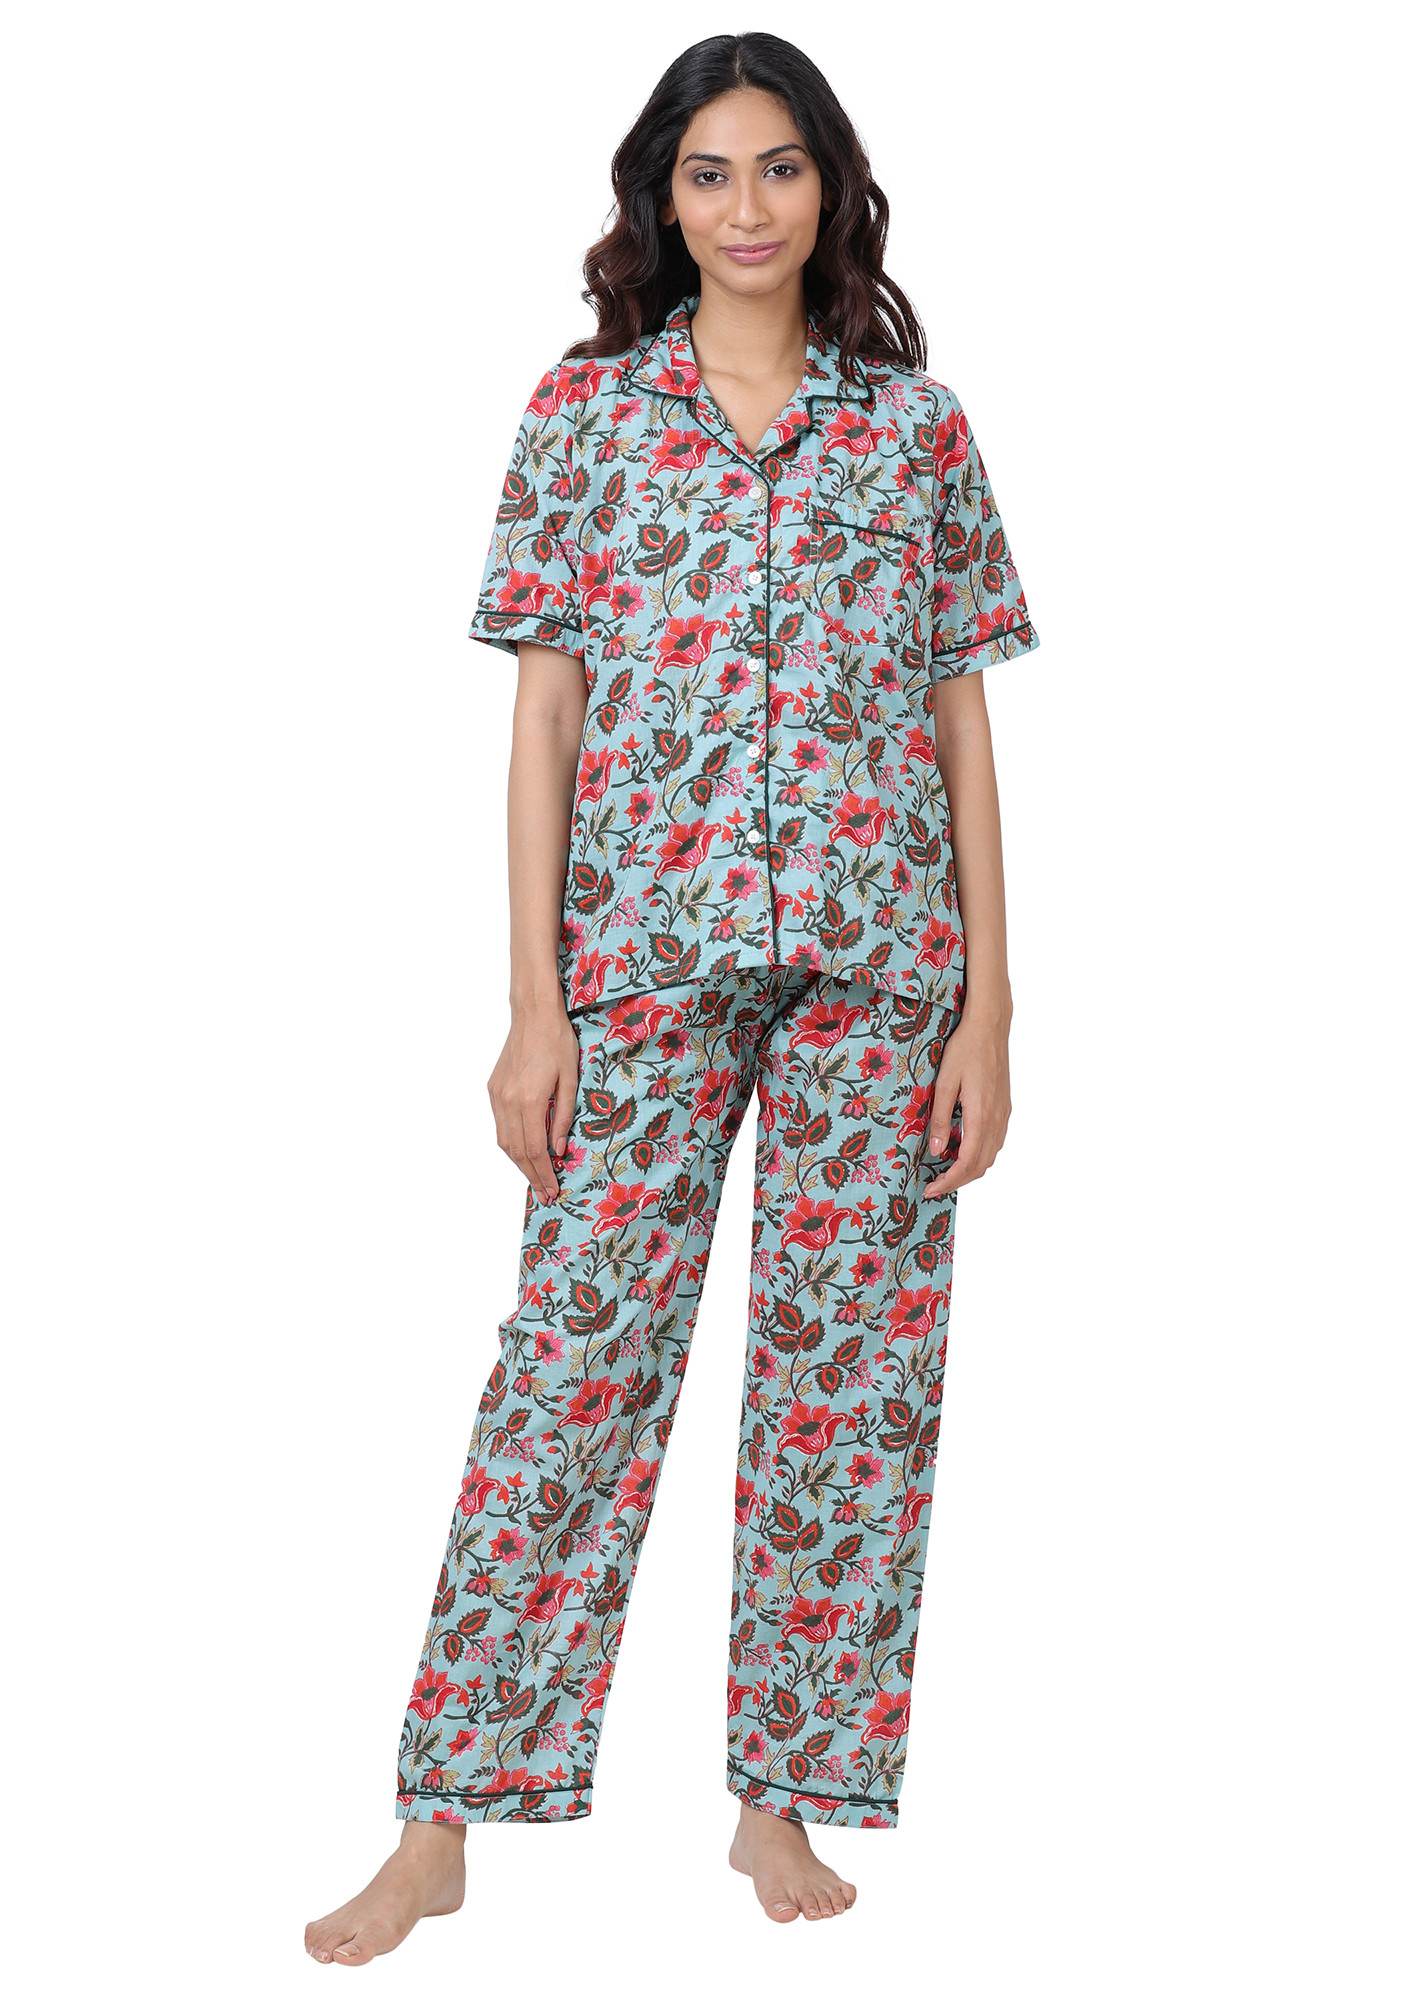 The Birdbox Project Women's Floral Block Printed 100% Cotton Nightsuit Set Straight Fit Half Sleeves Night Suit Button Down LoungeWear Pyjama Top Blue Vintage Floral